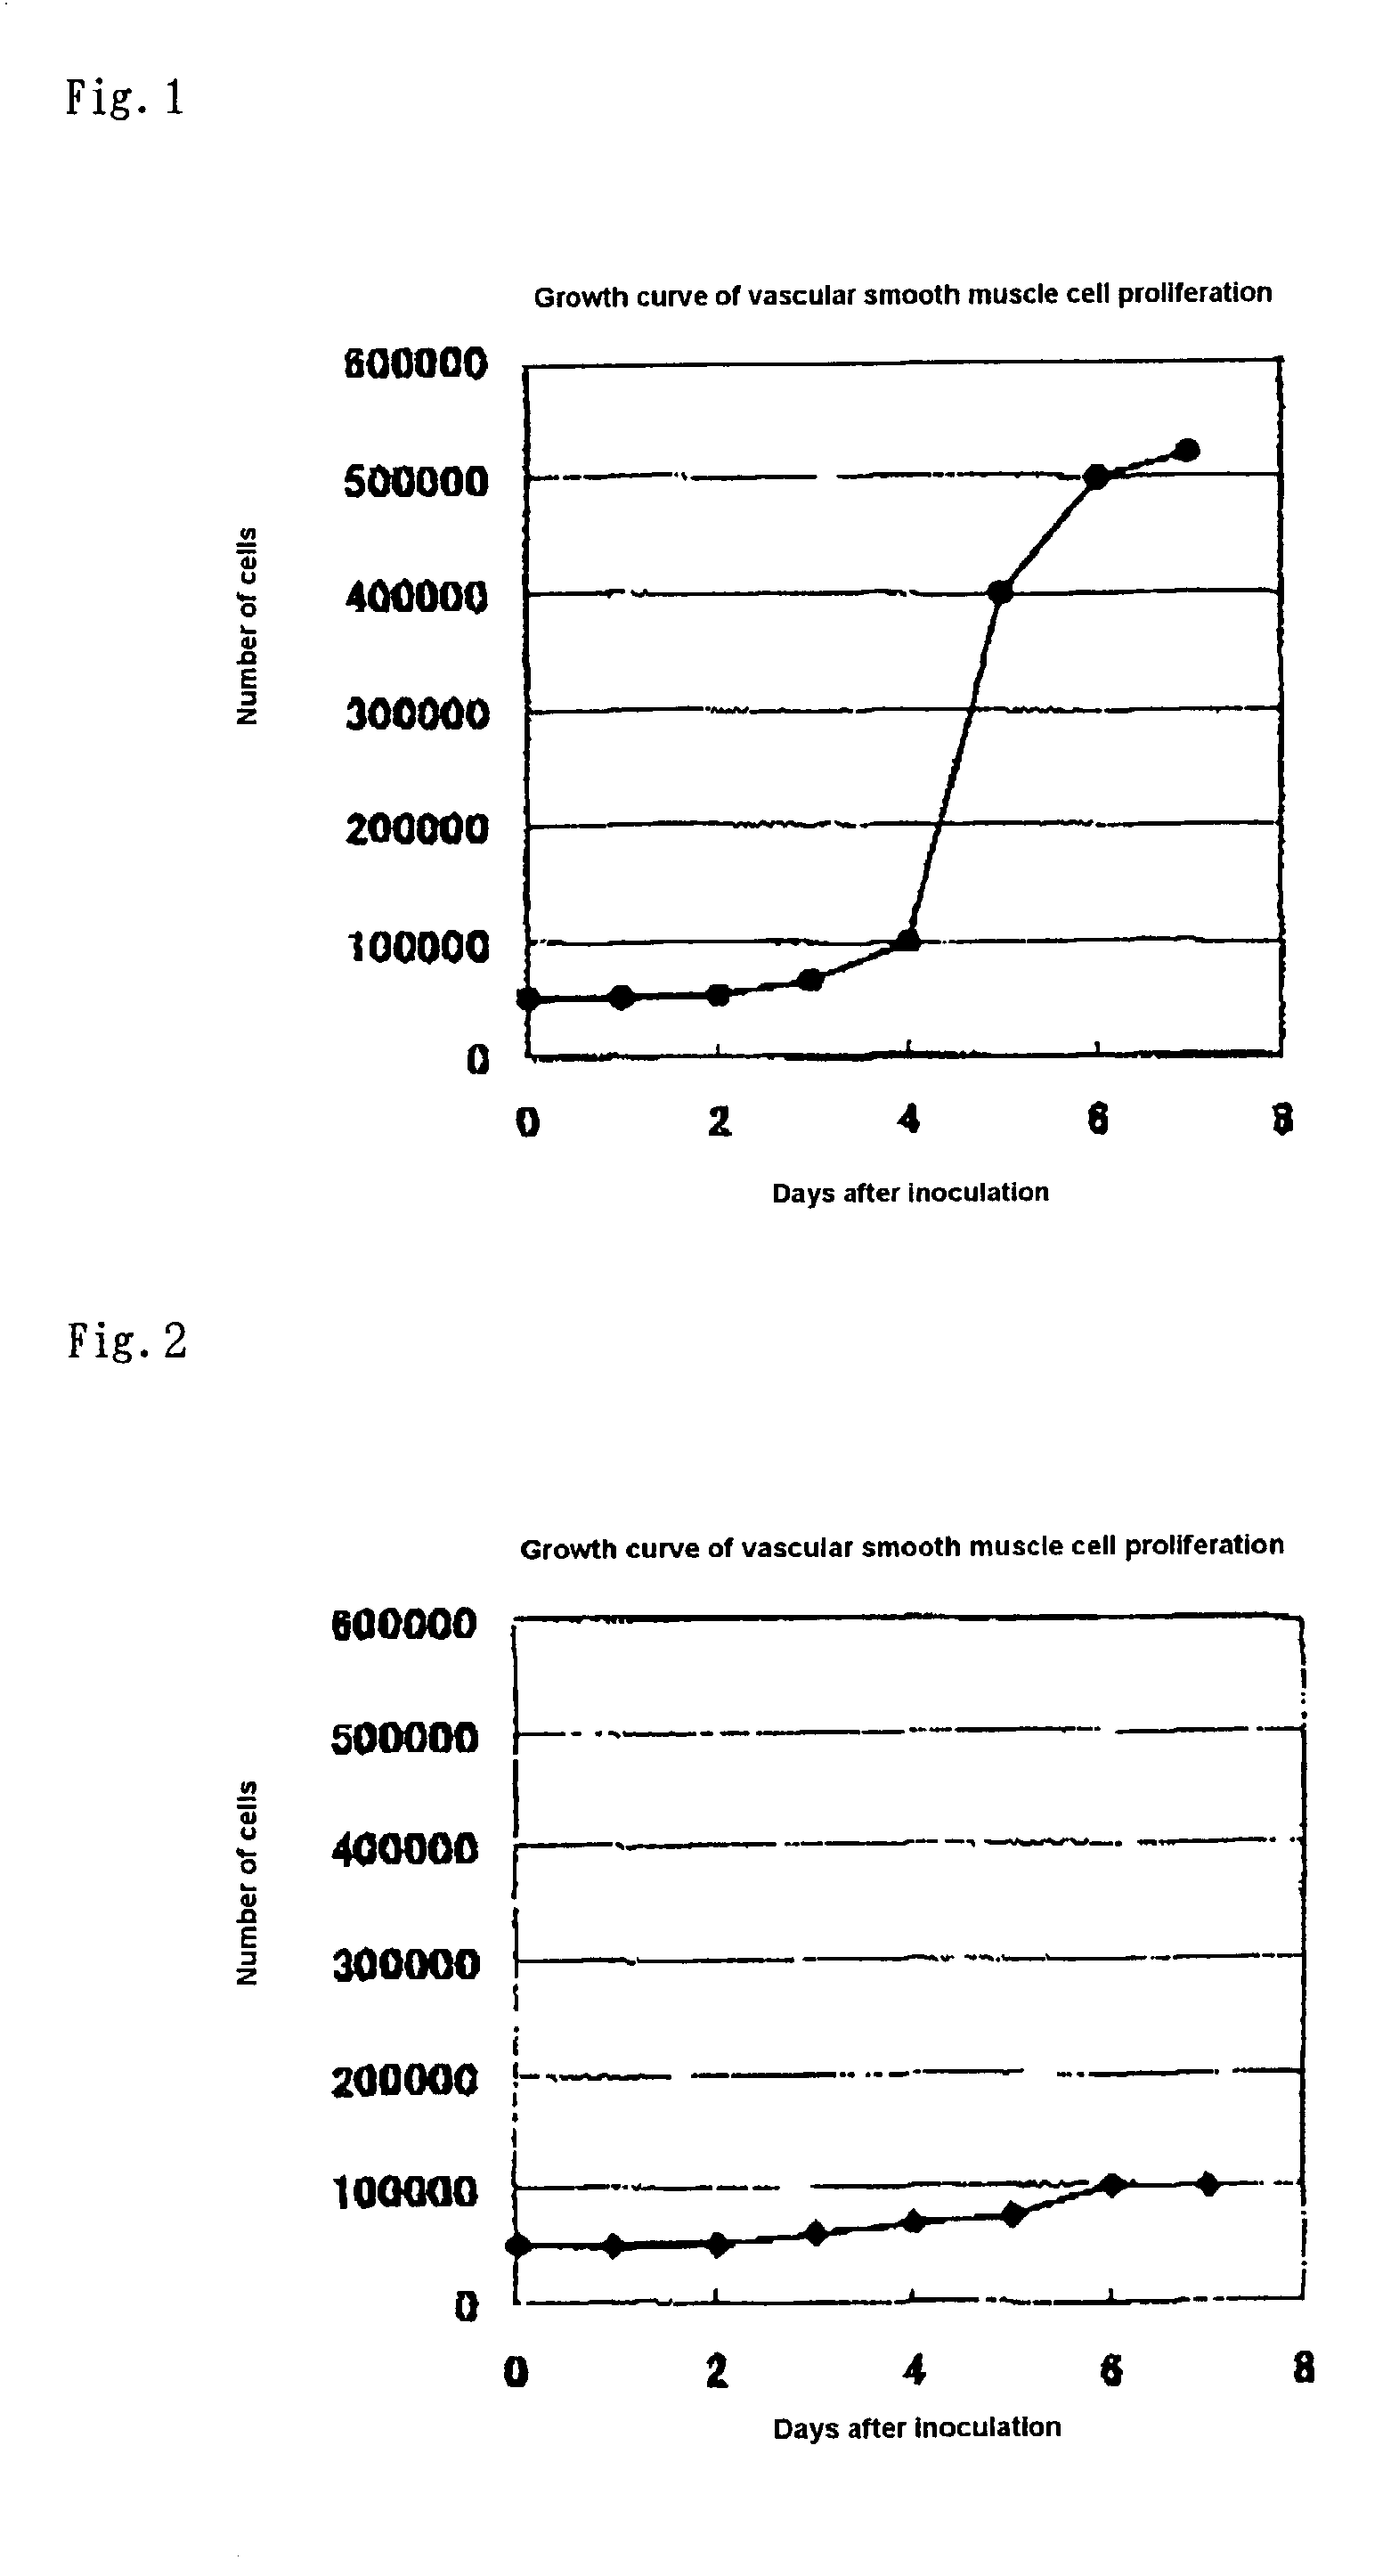 Liposome containing hydrophobic iodine compound and X-ray contrast medium for radiograph comprising the liposome